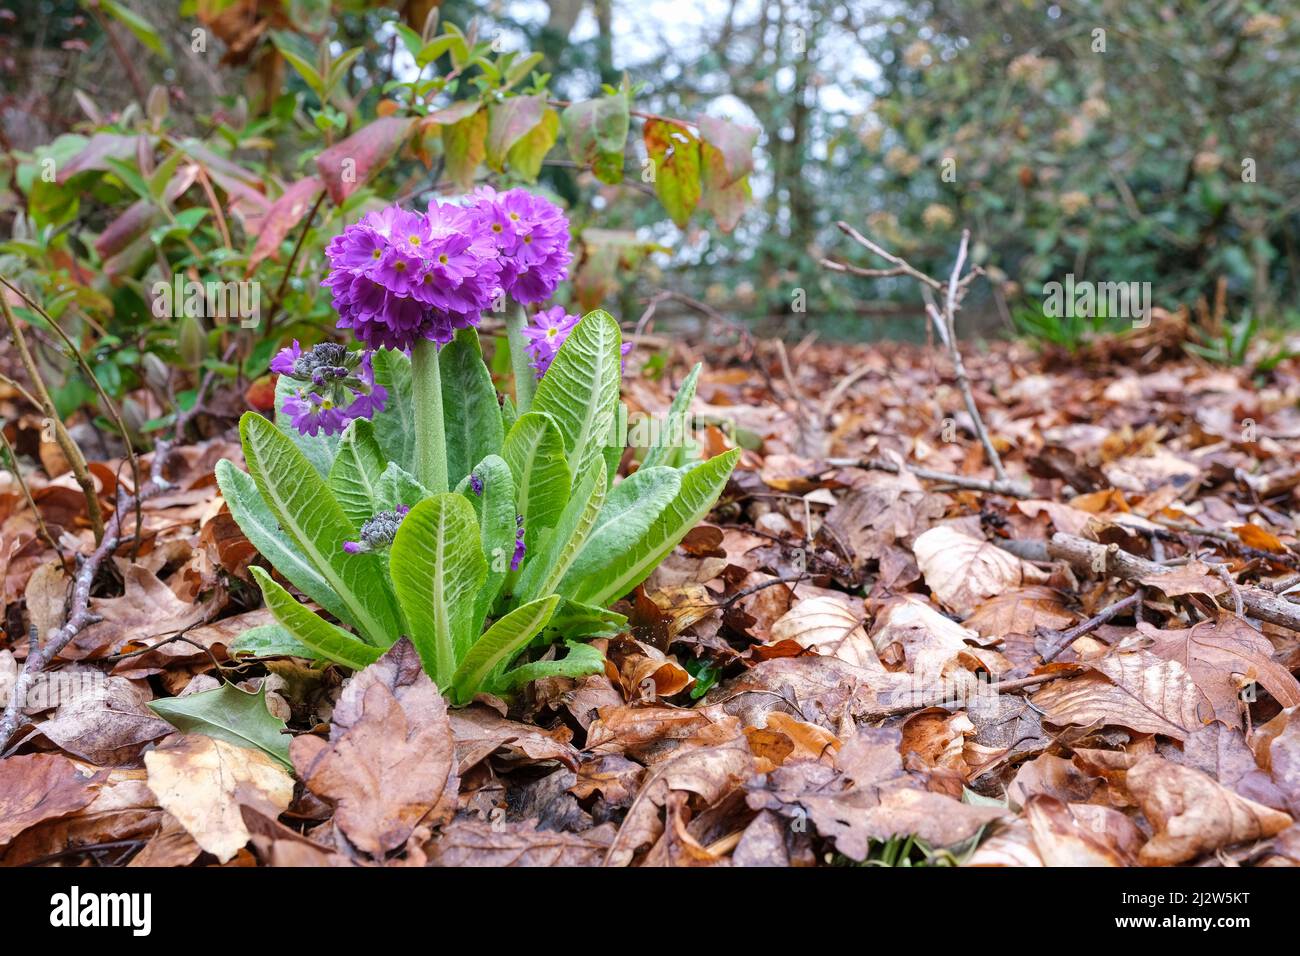 Primula denticulata, drumstick primula, tooth-leaved primrose. Eye level view of plant in flower amidst leaves from the previous Autumn. Stock Photo